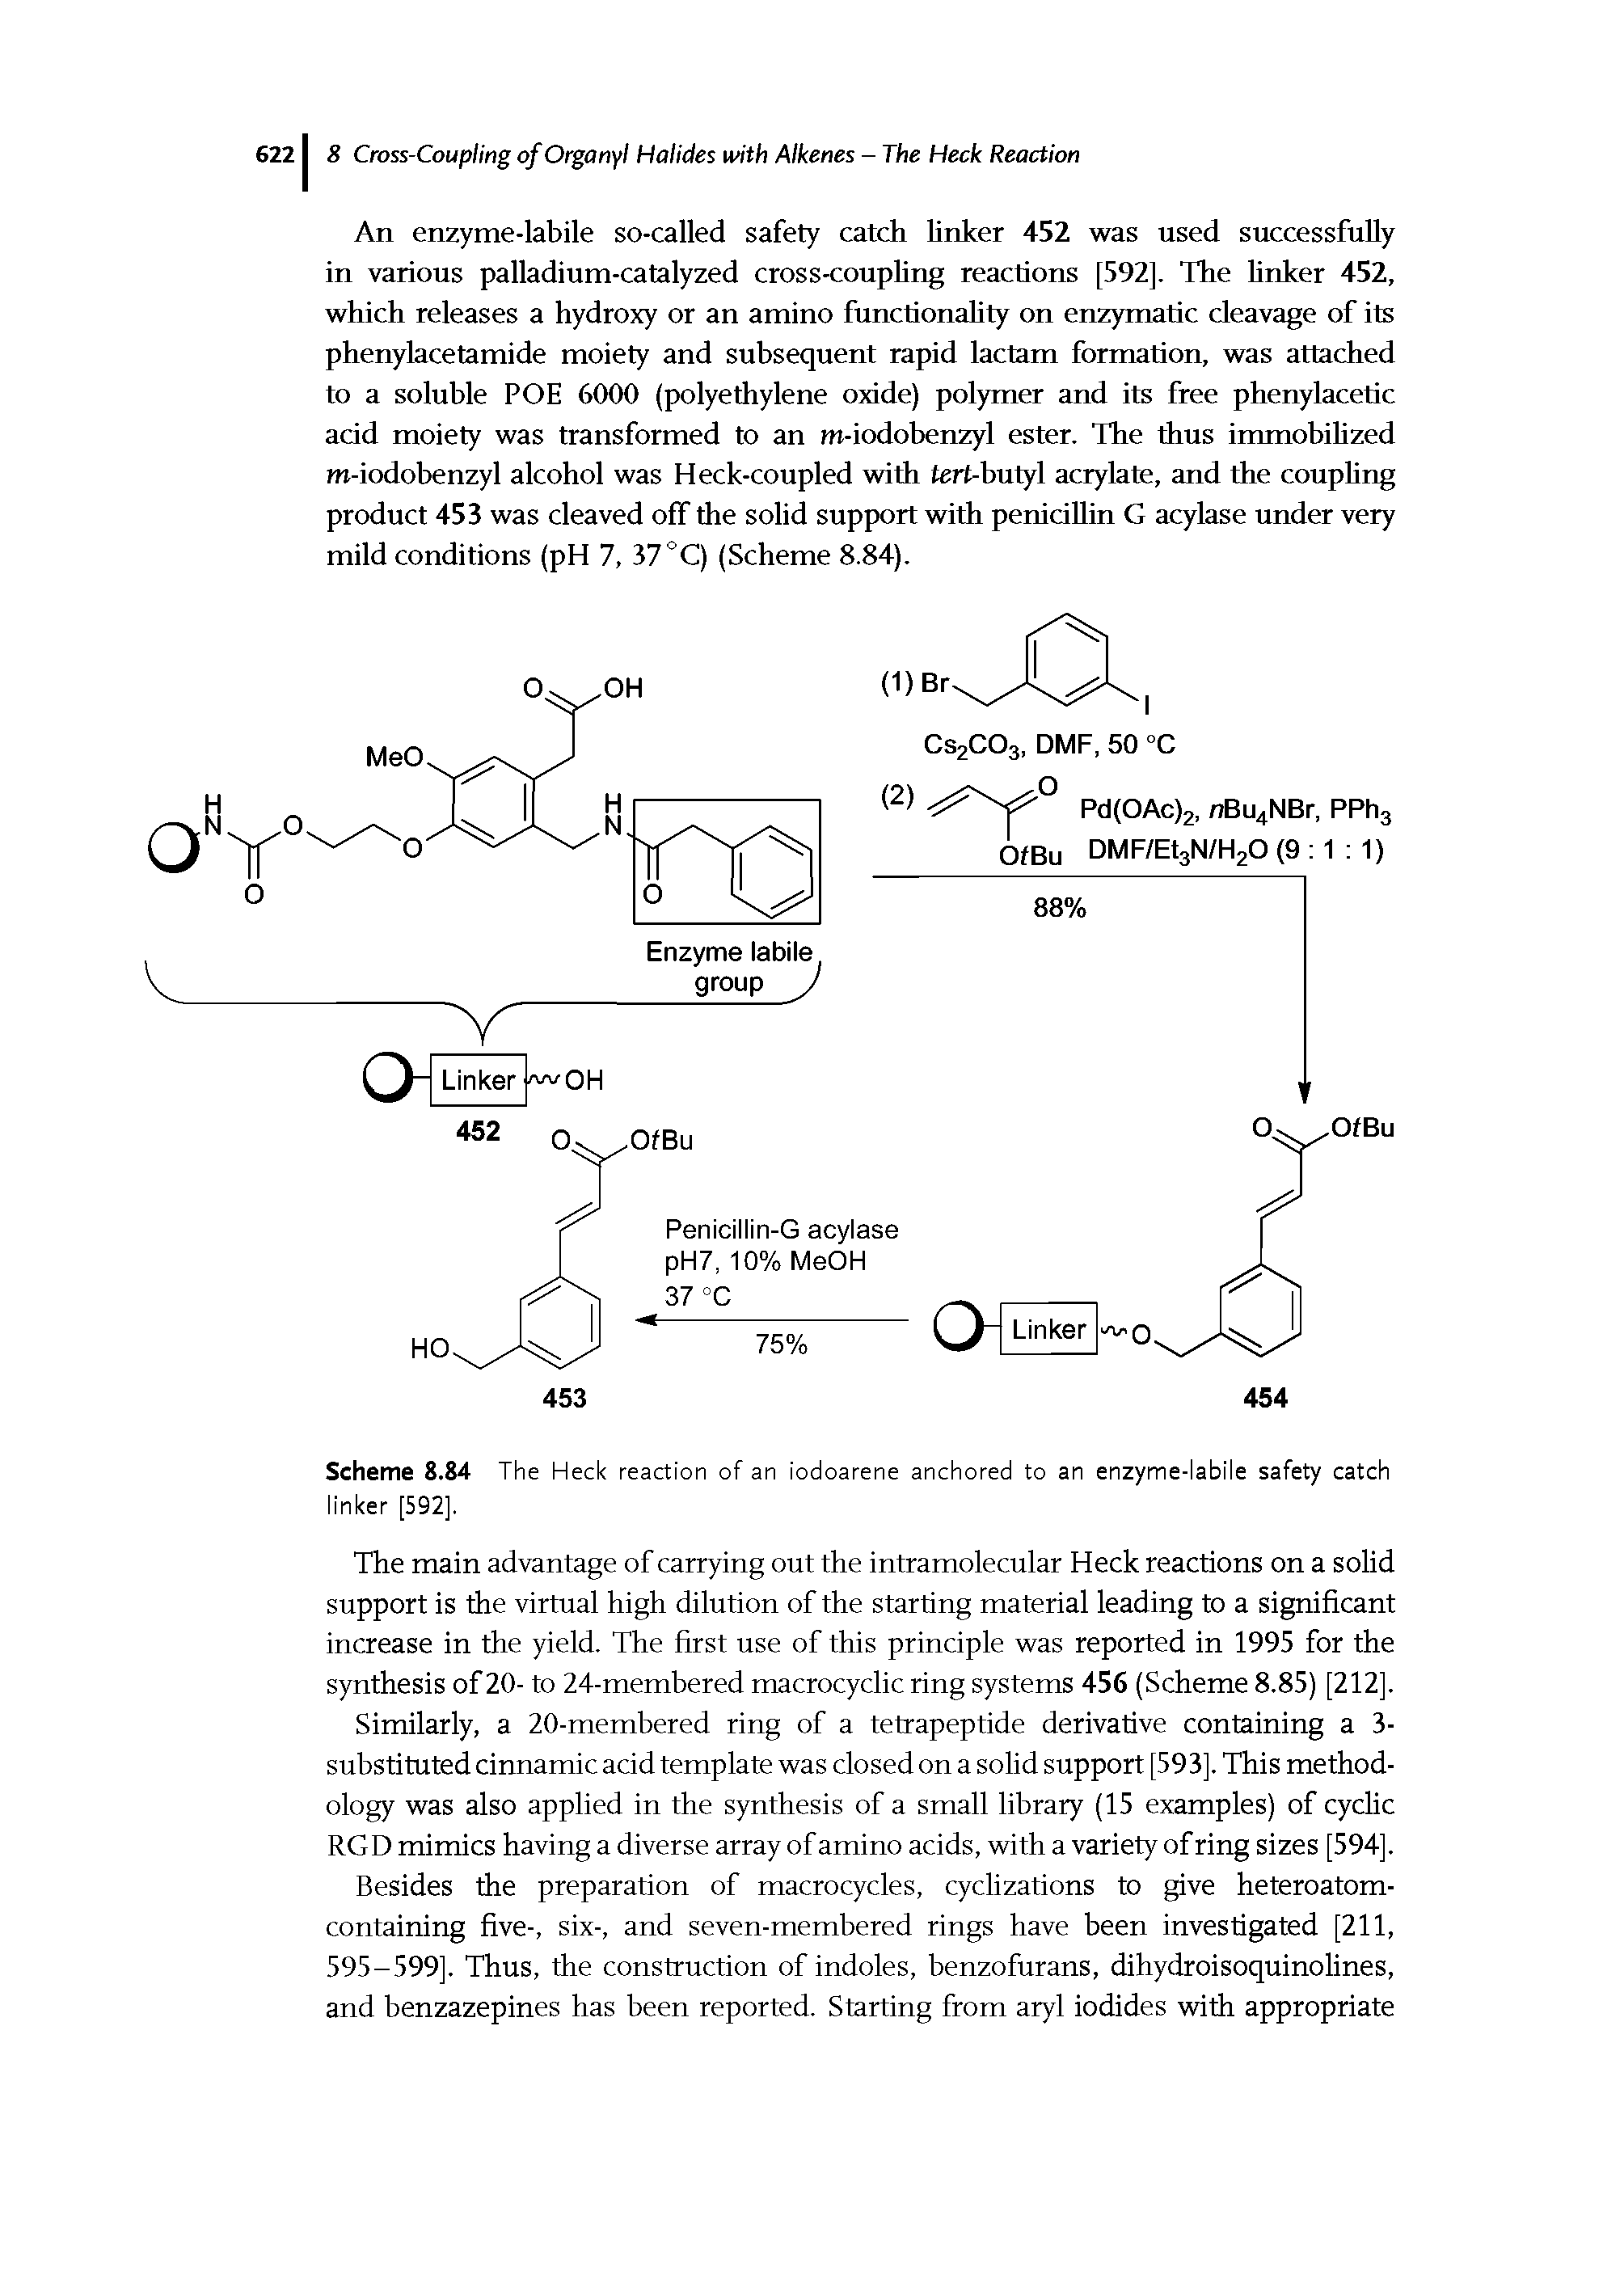 Scheme 8.84 The Heck reaction of an iodoarene anchored to an enzyme-labile safety catch linker [592].